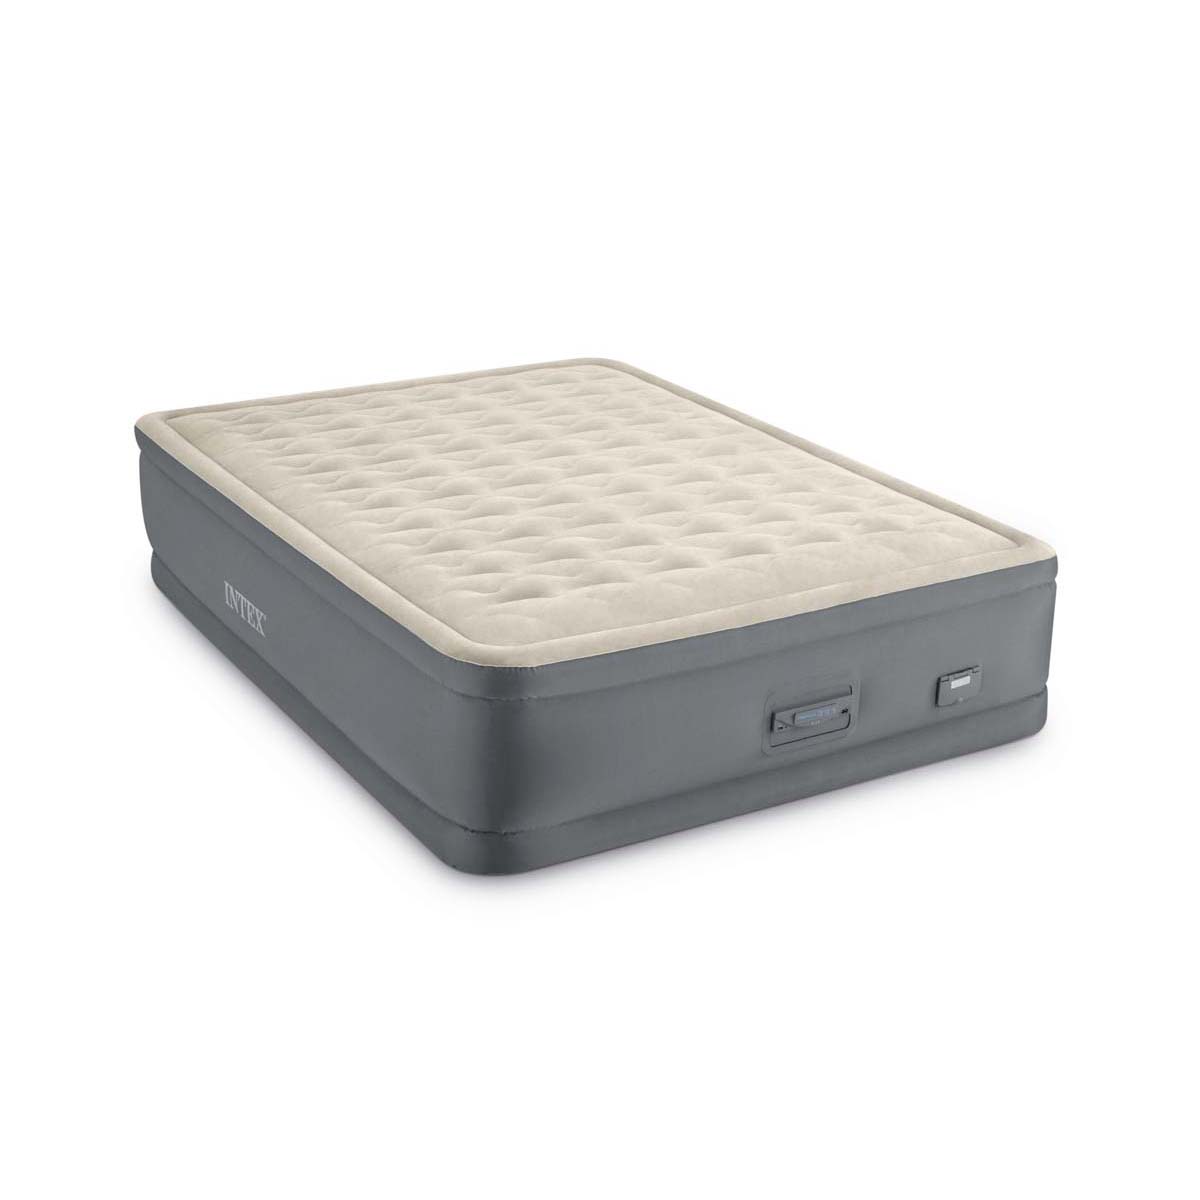 Intex PremAire II Queen Air Bed With Built-In Pump